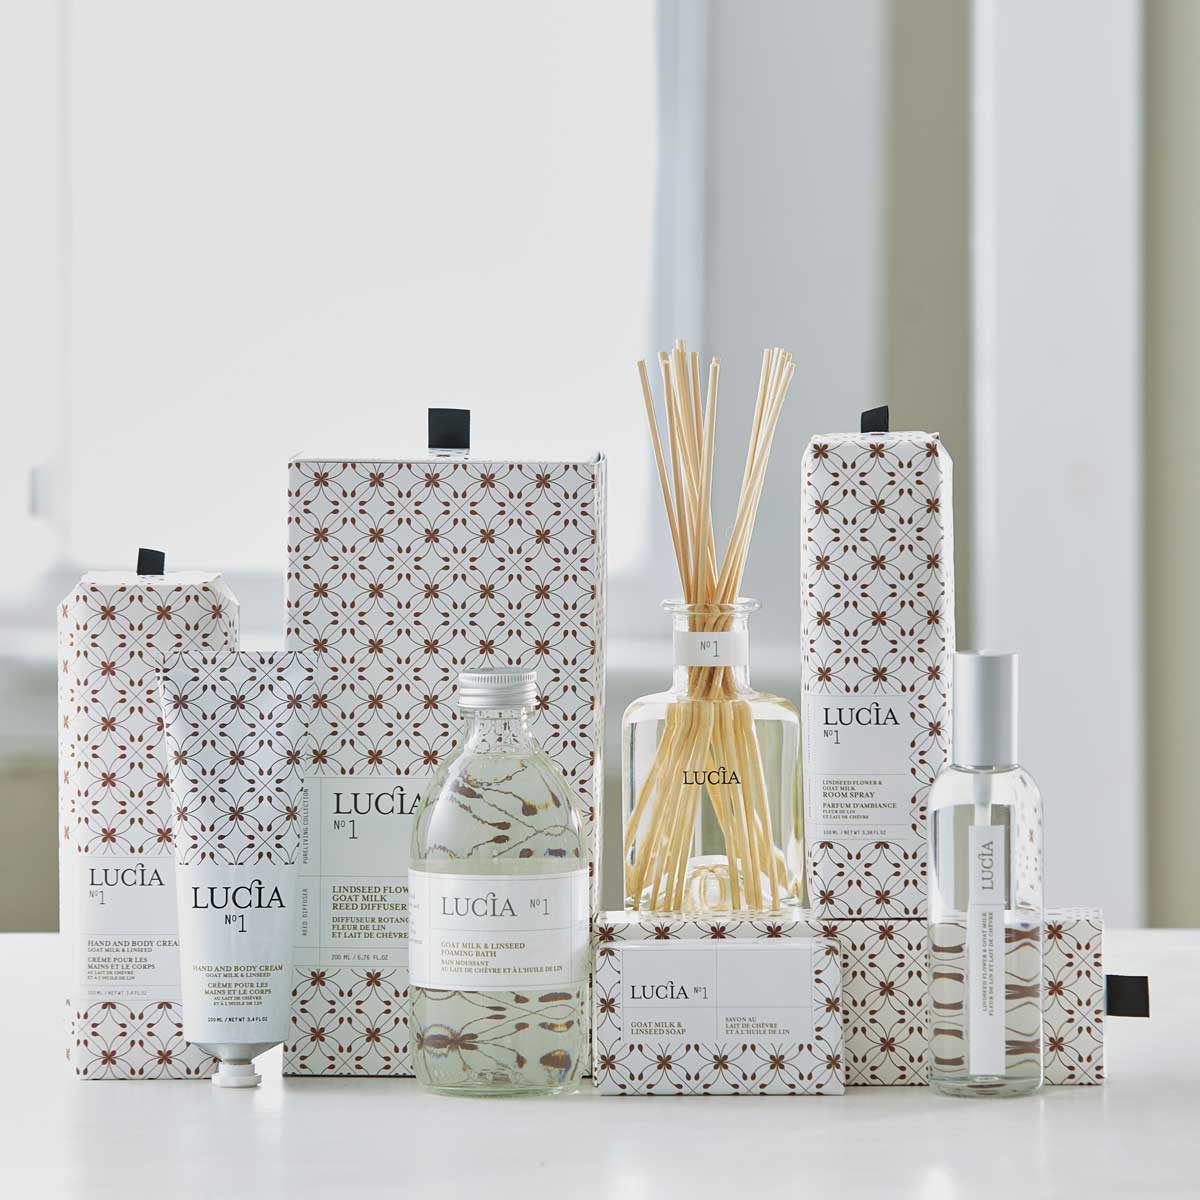 LUCIA BATH, BODY & HOME COLLECTION - LINSEED FLOWER & GOAT MILK - No.1